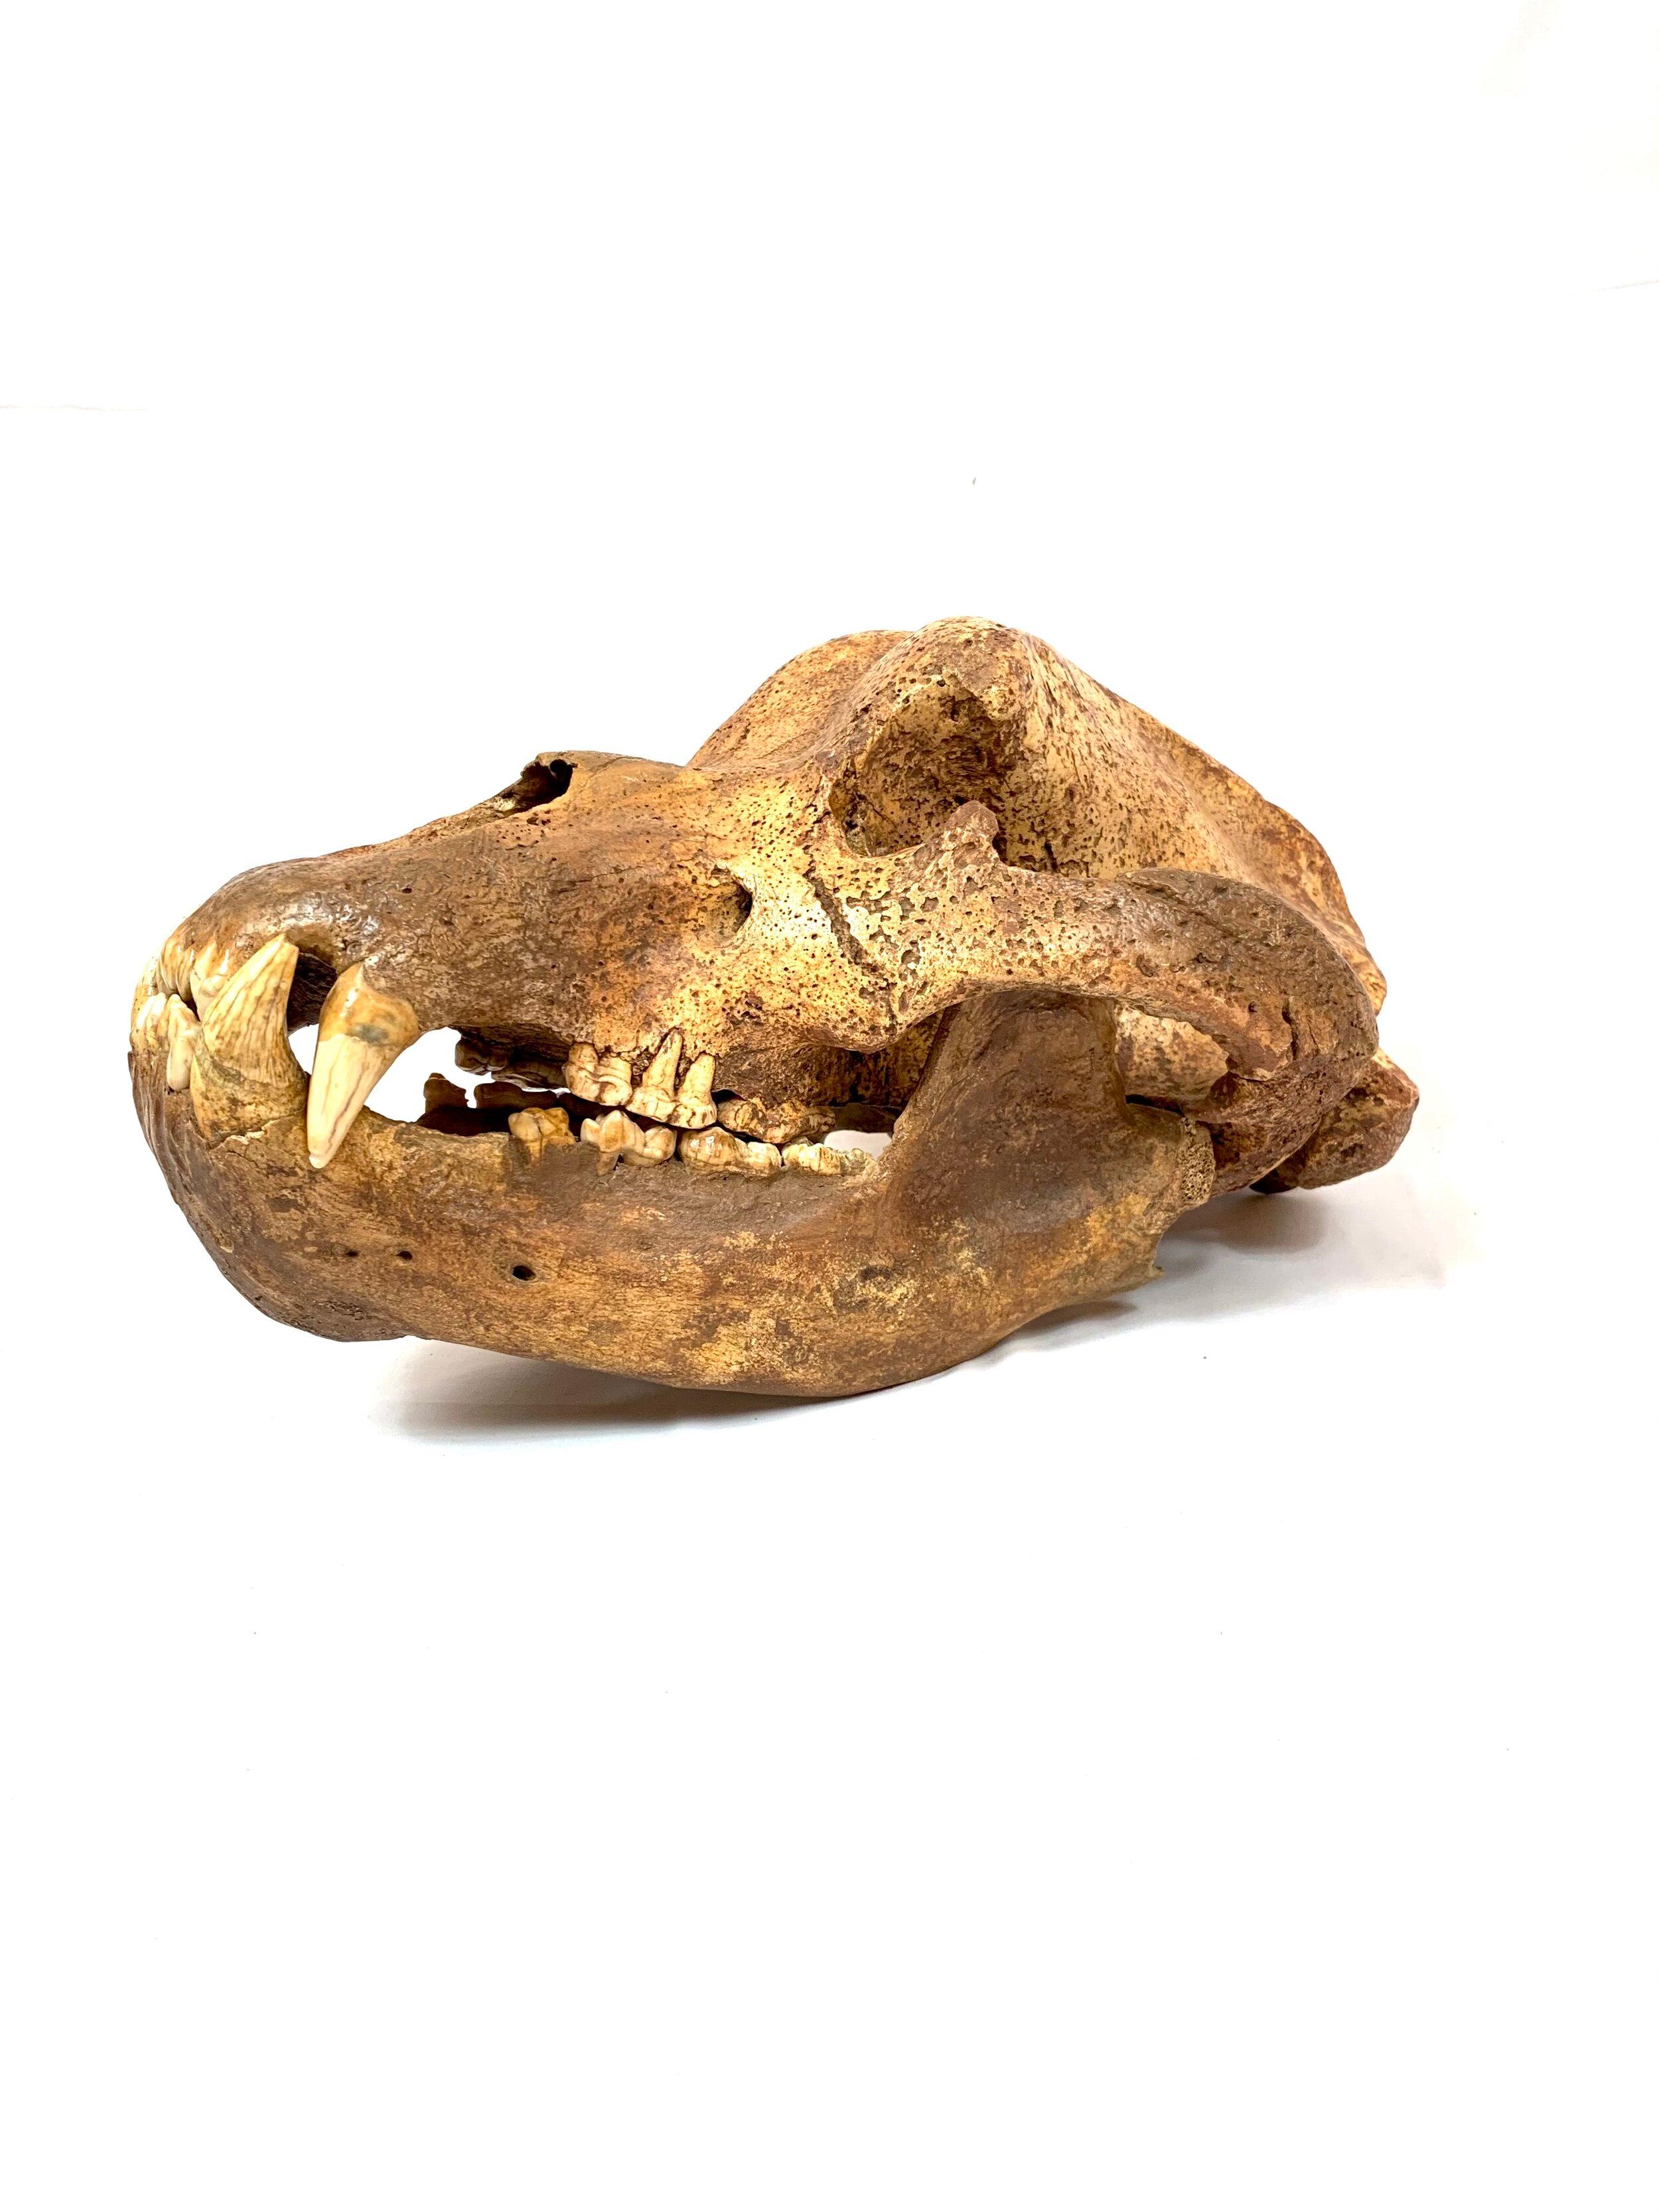 Skull of extinct cave bear from Mixnitz, Austria. Circa 70,000 Years Old

Natural History. From rare dinosaur skulls and Stone Age tools to the world’s earliest animals that date back millions of years, the Extraordinary Objects collection of